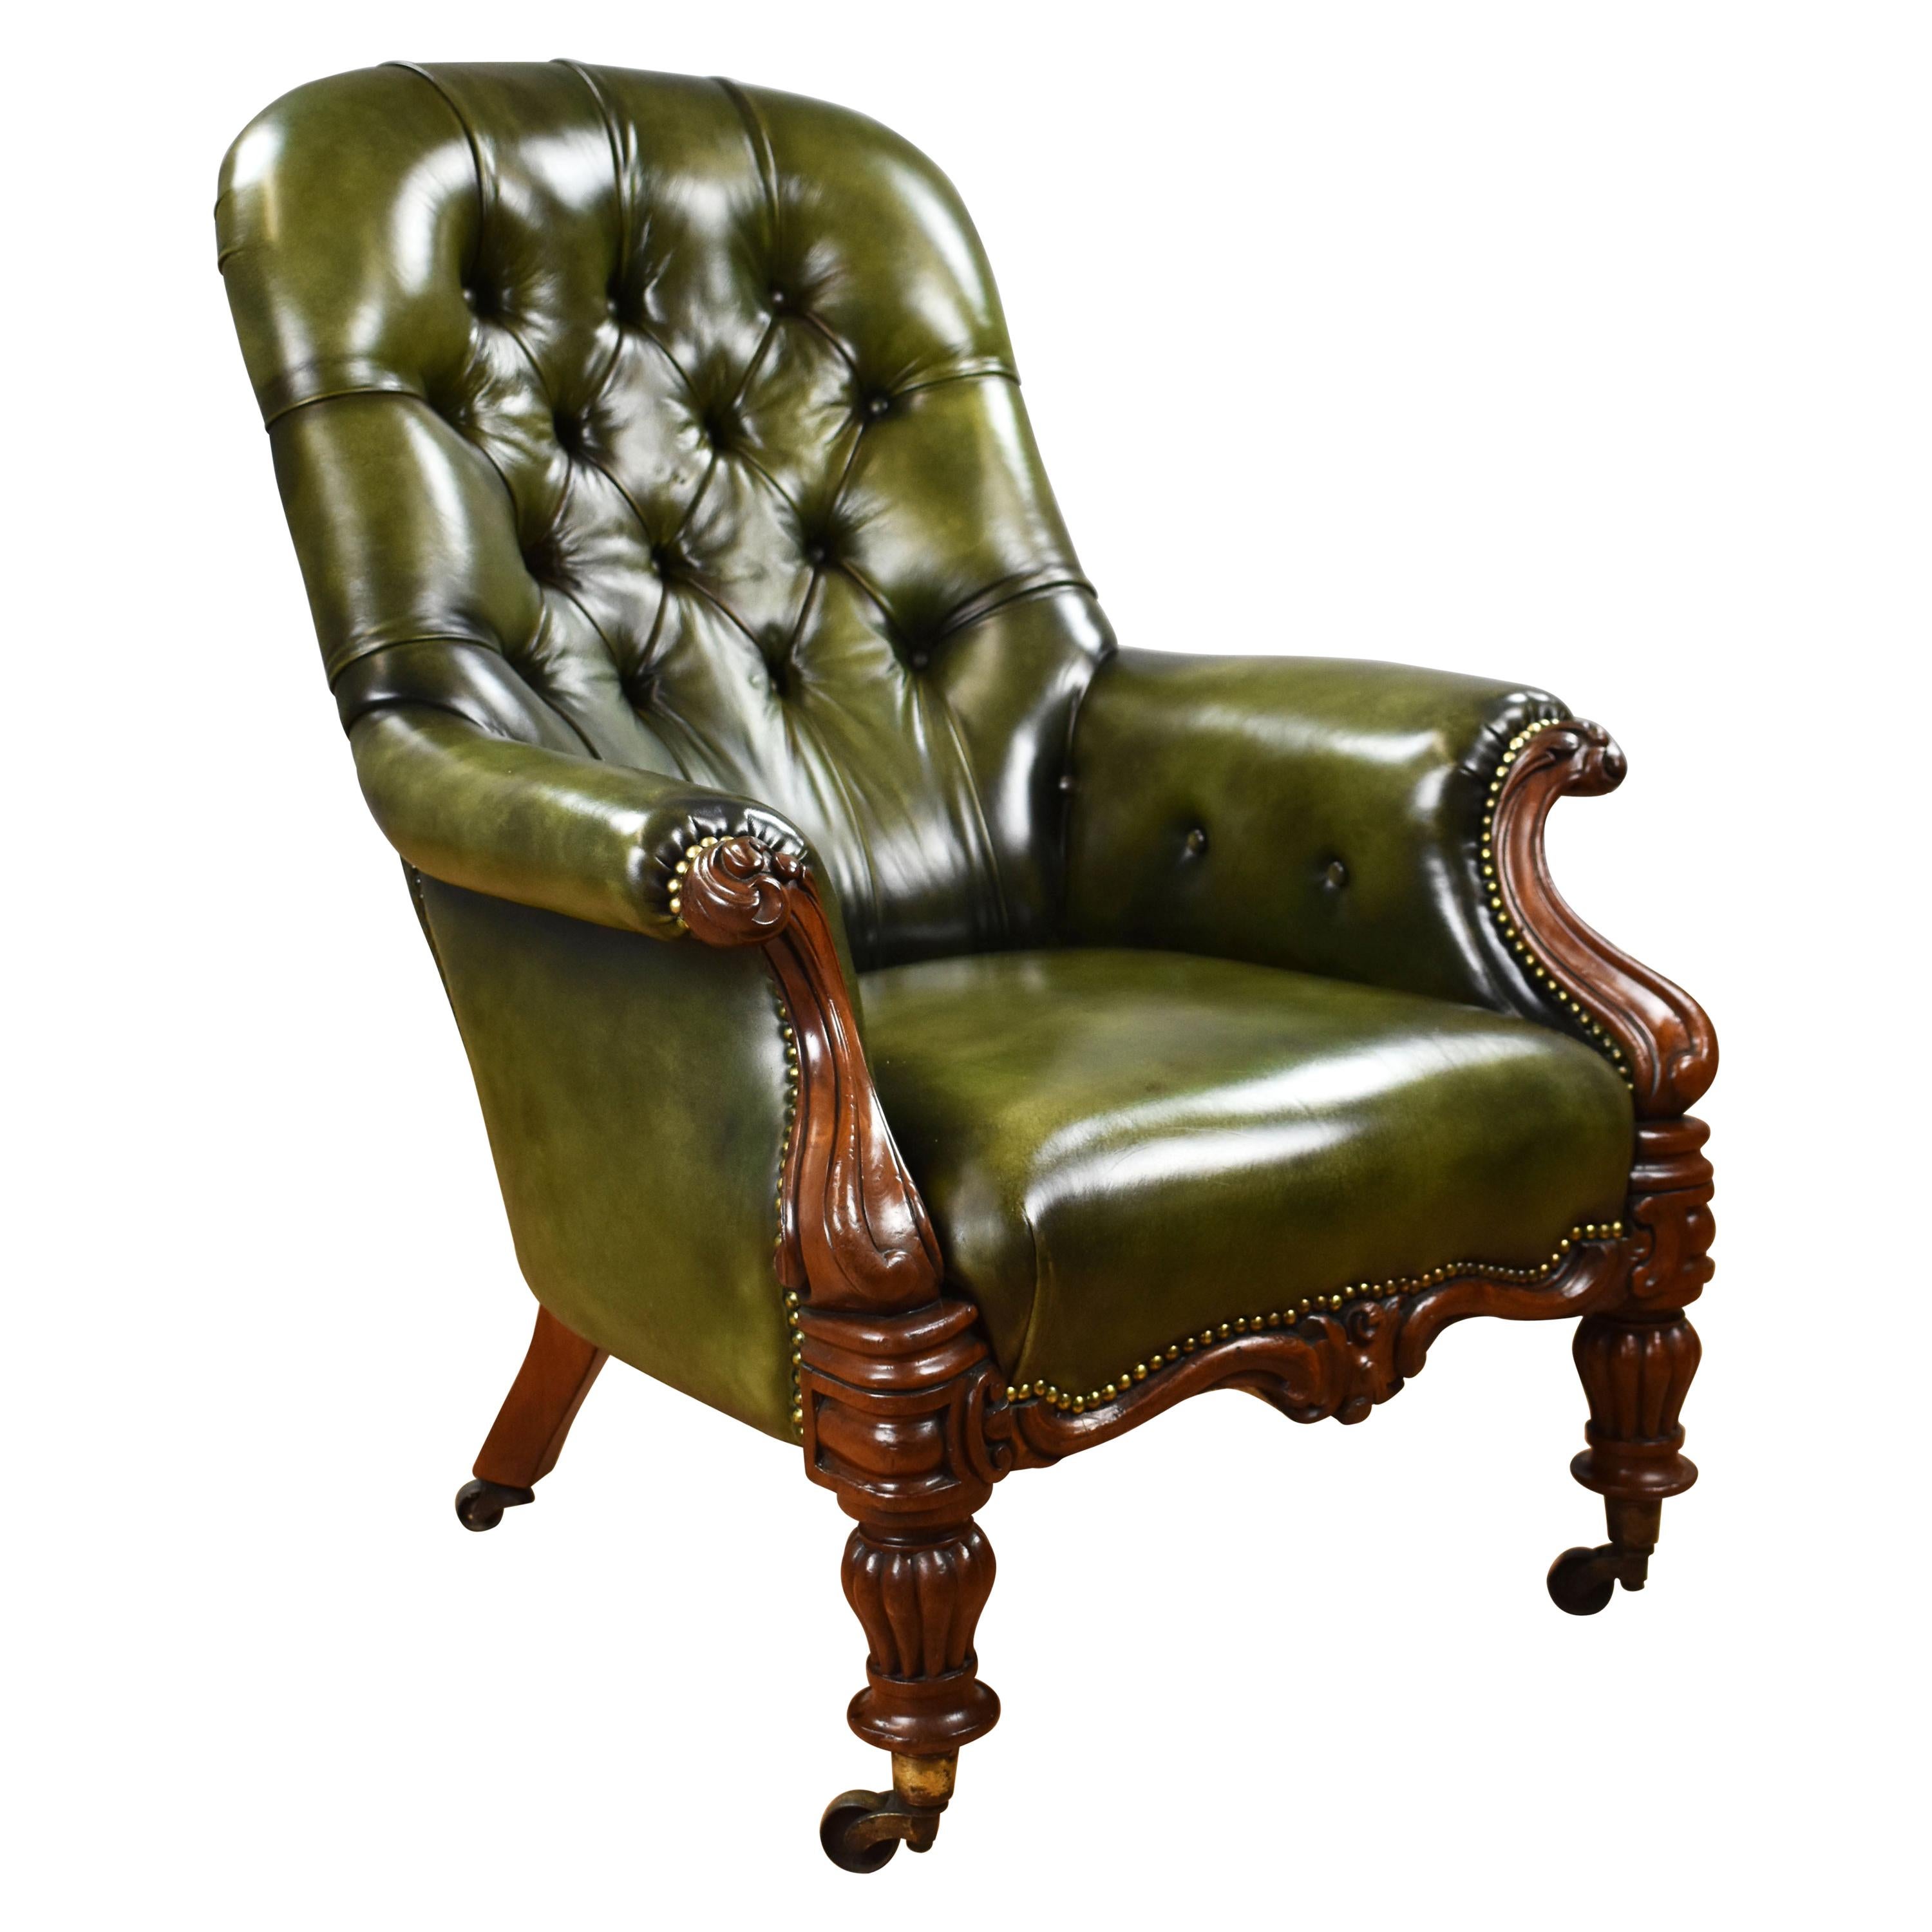 19th Century English William IV Mahogany Hand Dyed Leather Library Chair